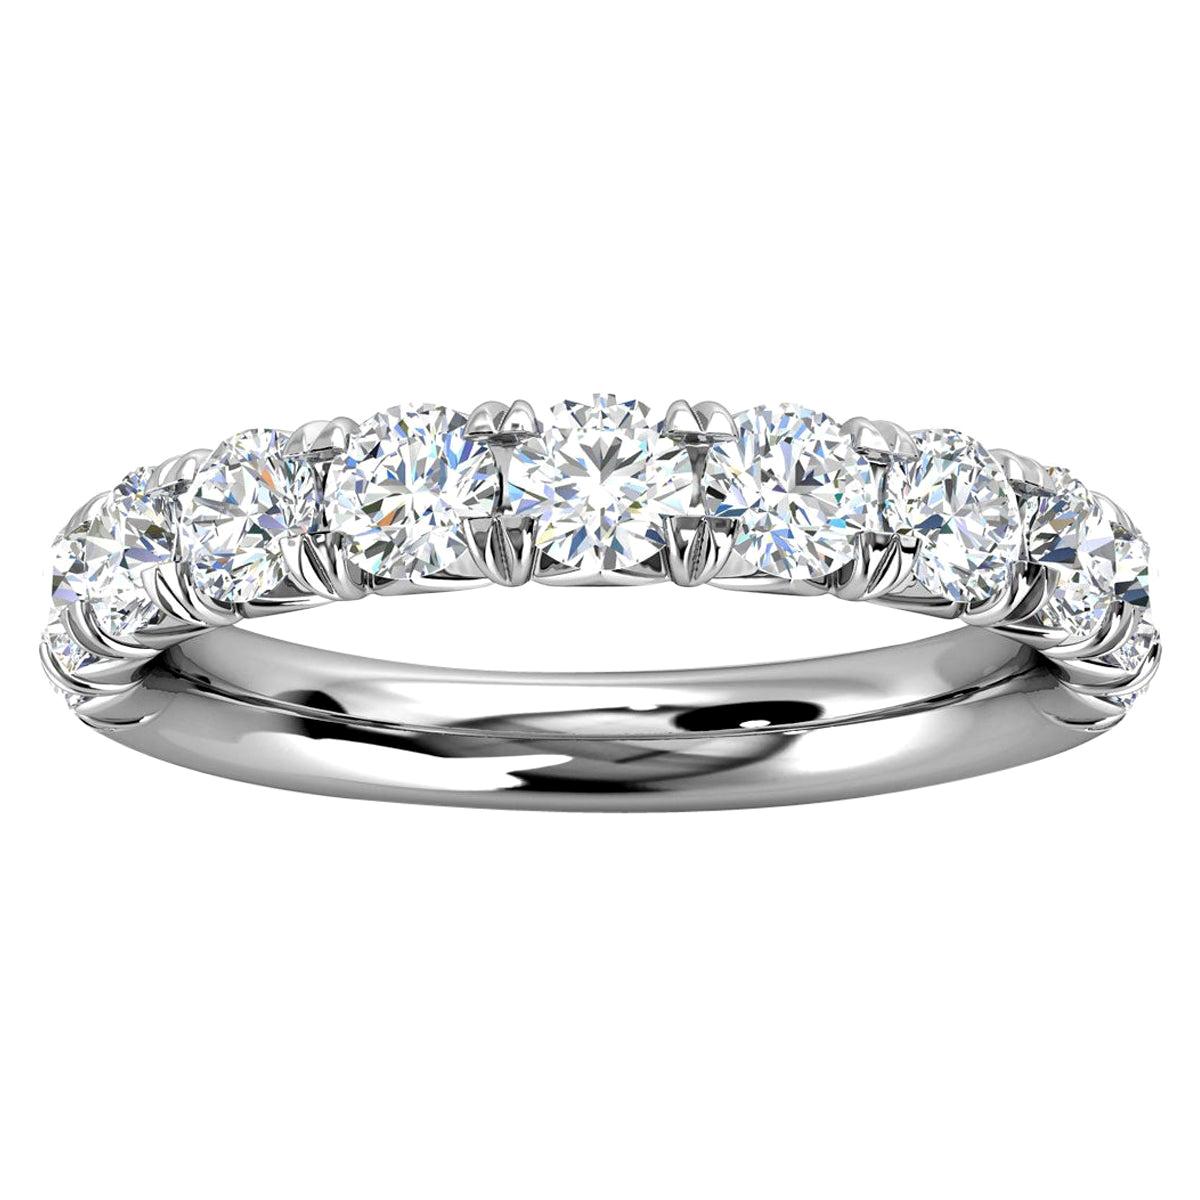 For Sale:  Platinum Voyage French Pave Diamond Ring '1 Ct. tw'